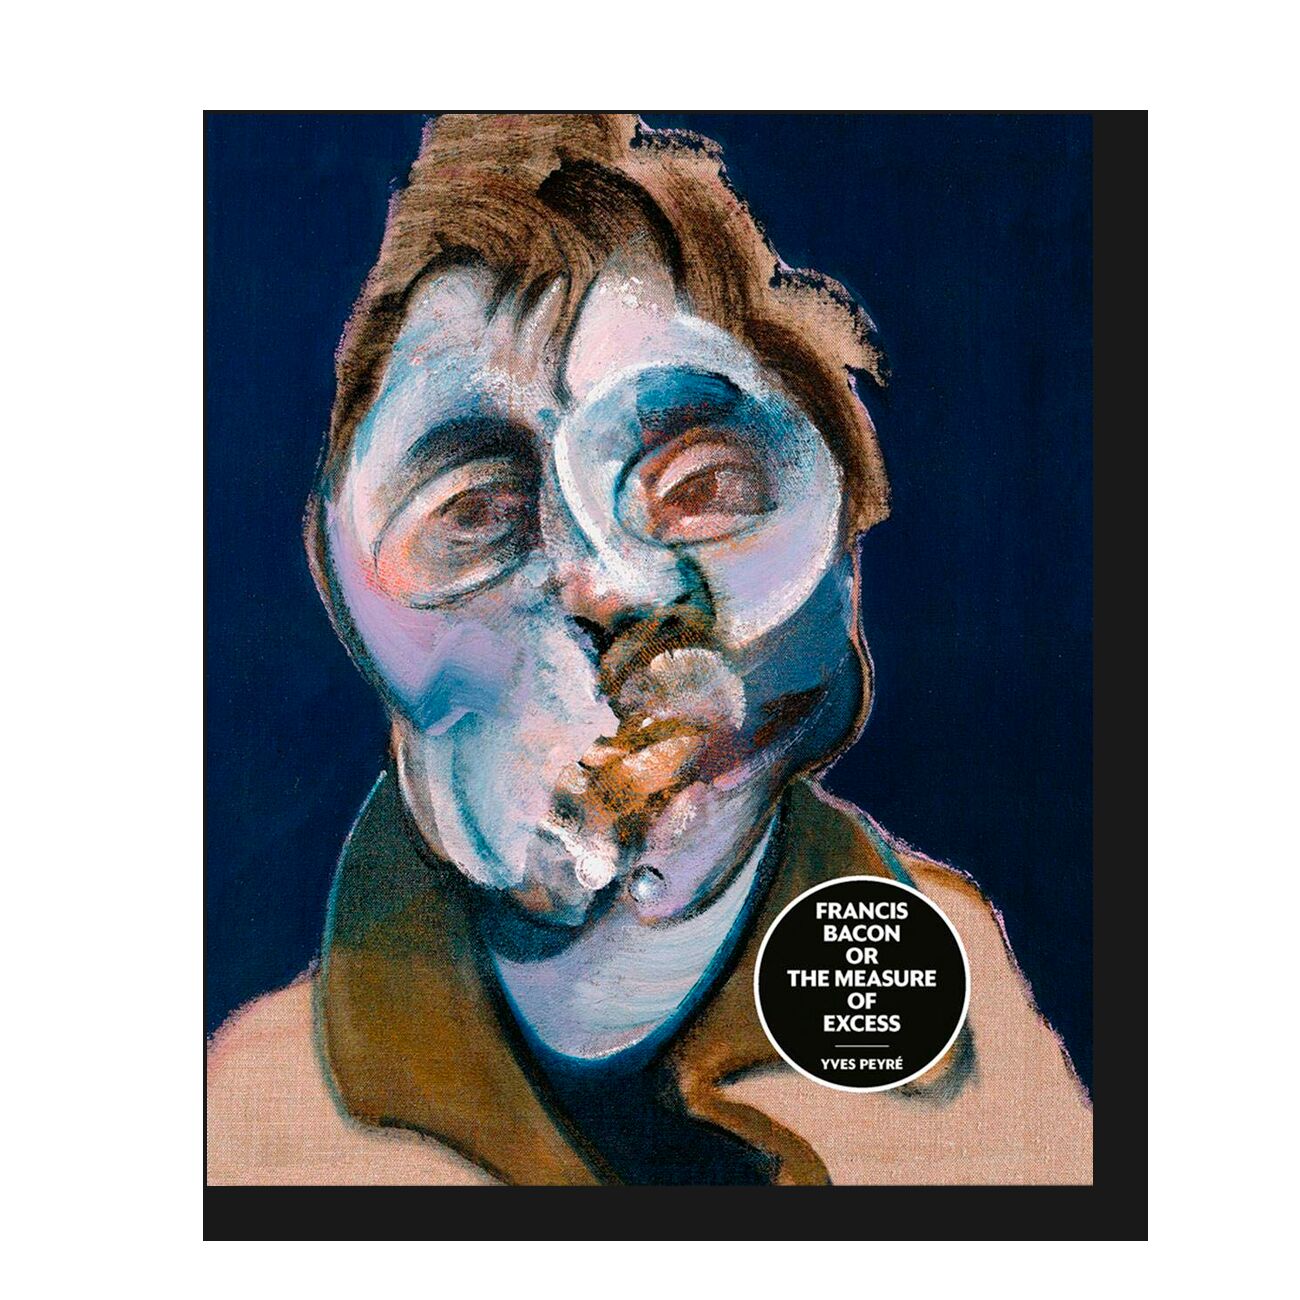 Francis Bacon or the Measure of excess